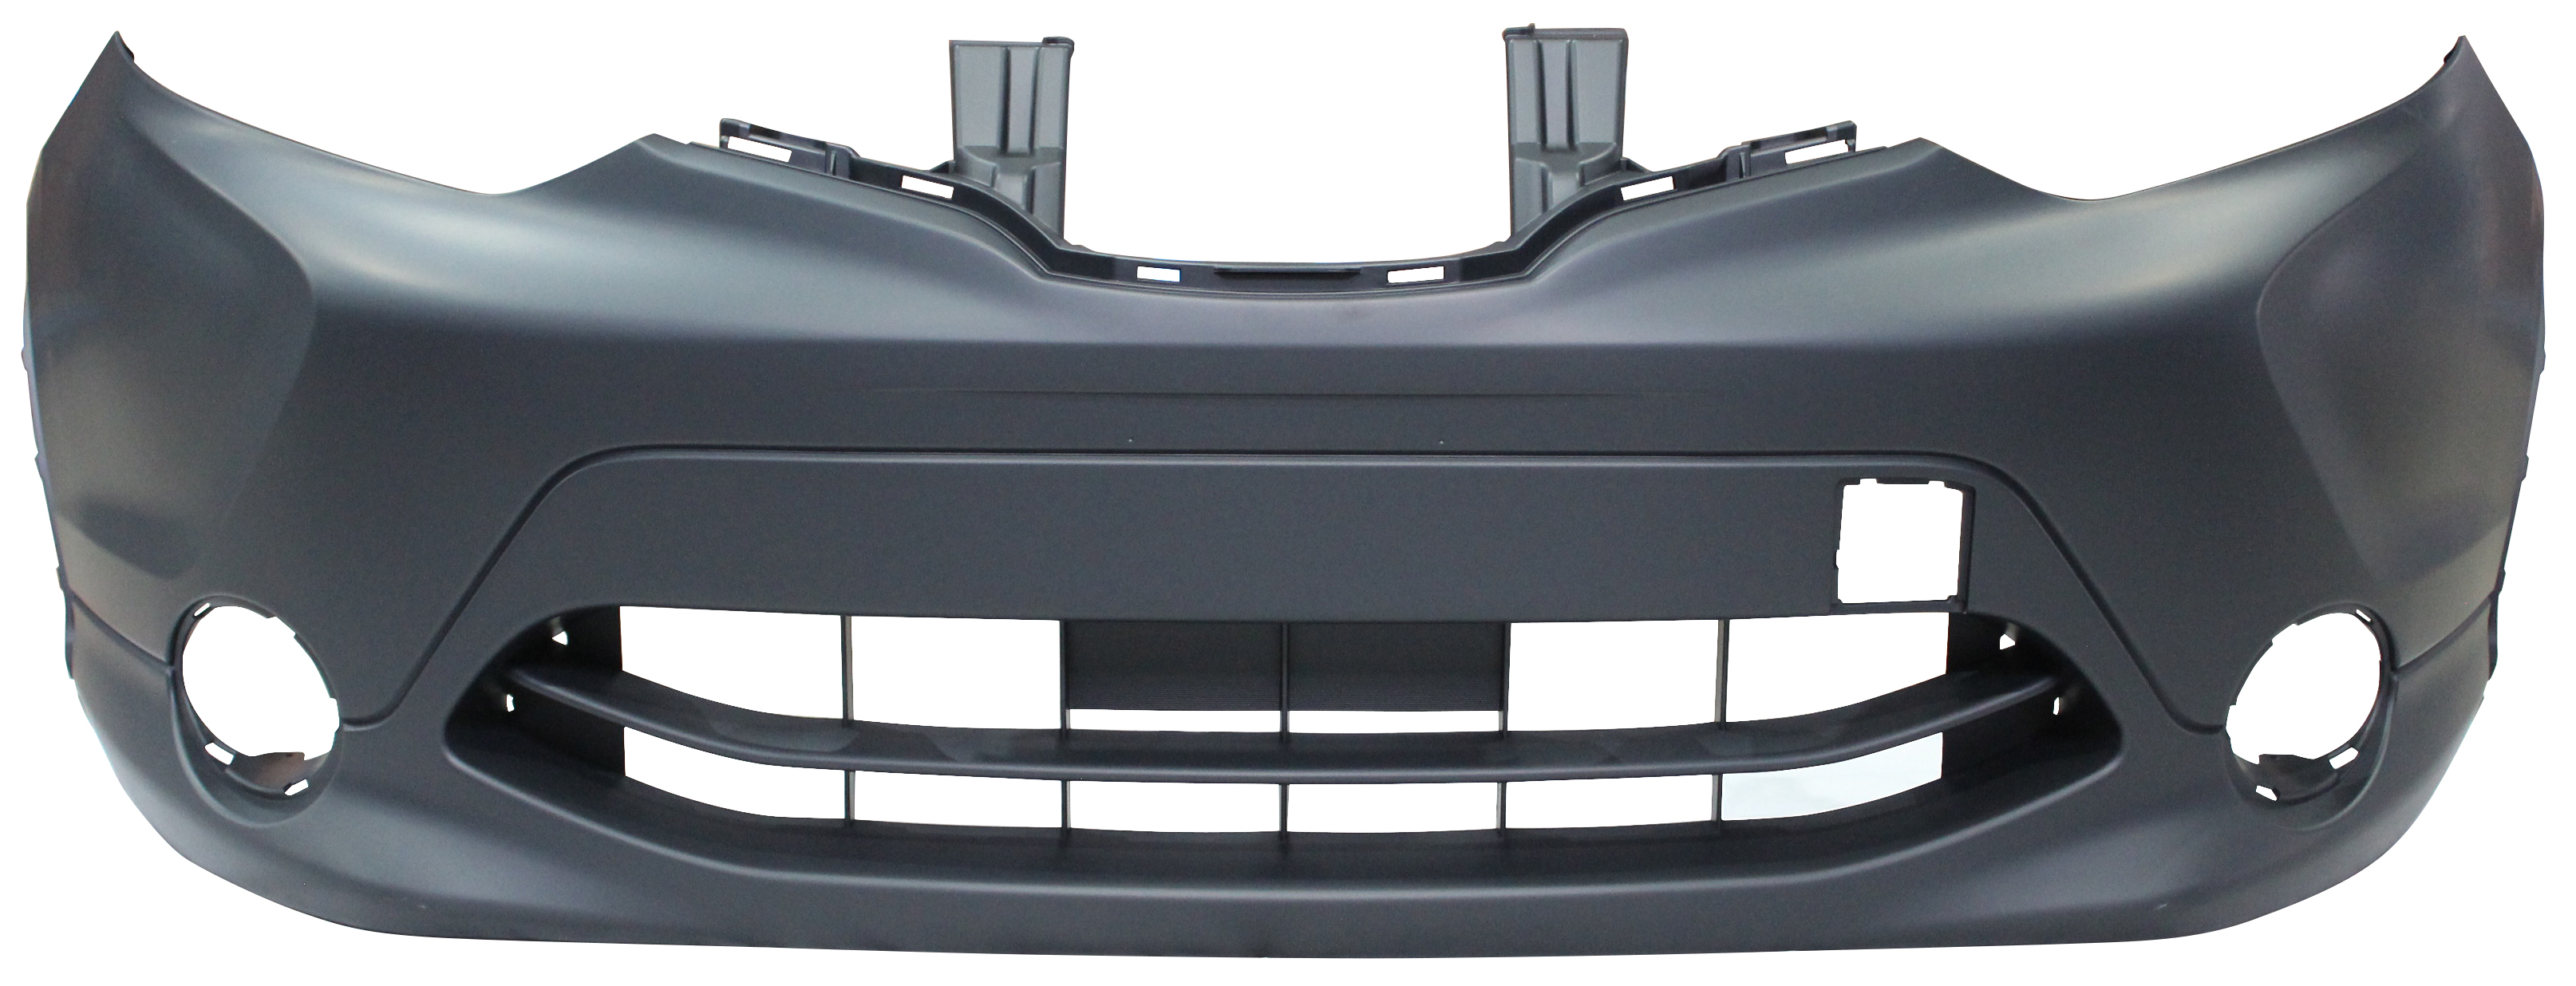 Aftermarket BUMPER COVERS for NISSAN - ROGUE SPORT, ROGUE SPORT,17-19,Front bumper cover